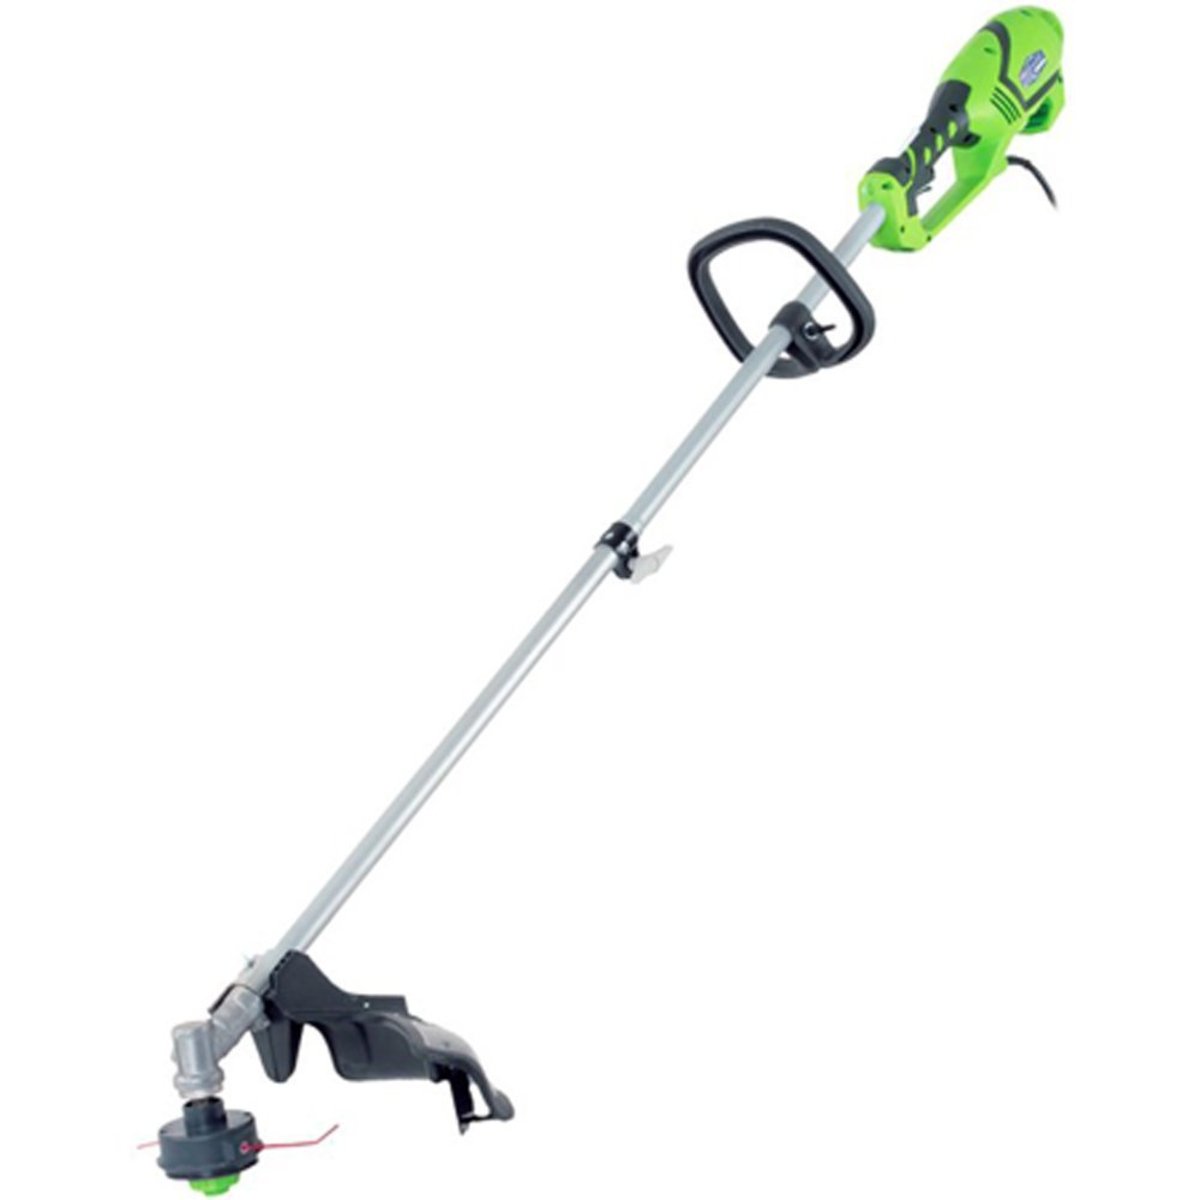 The GreenWorks 21142 10Amp 18 Inch Straight Shaft Trimmer is an easy to use tool that uses dual string technology.  Quiet and clean,  the 18 inch cutting area means that you can cover areas quicker.